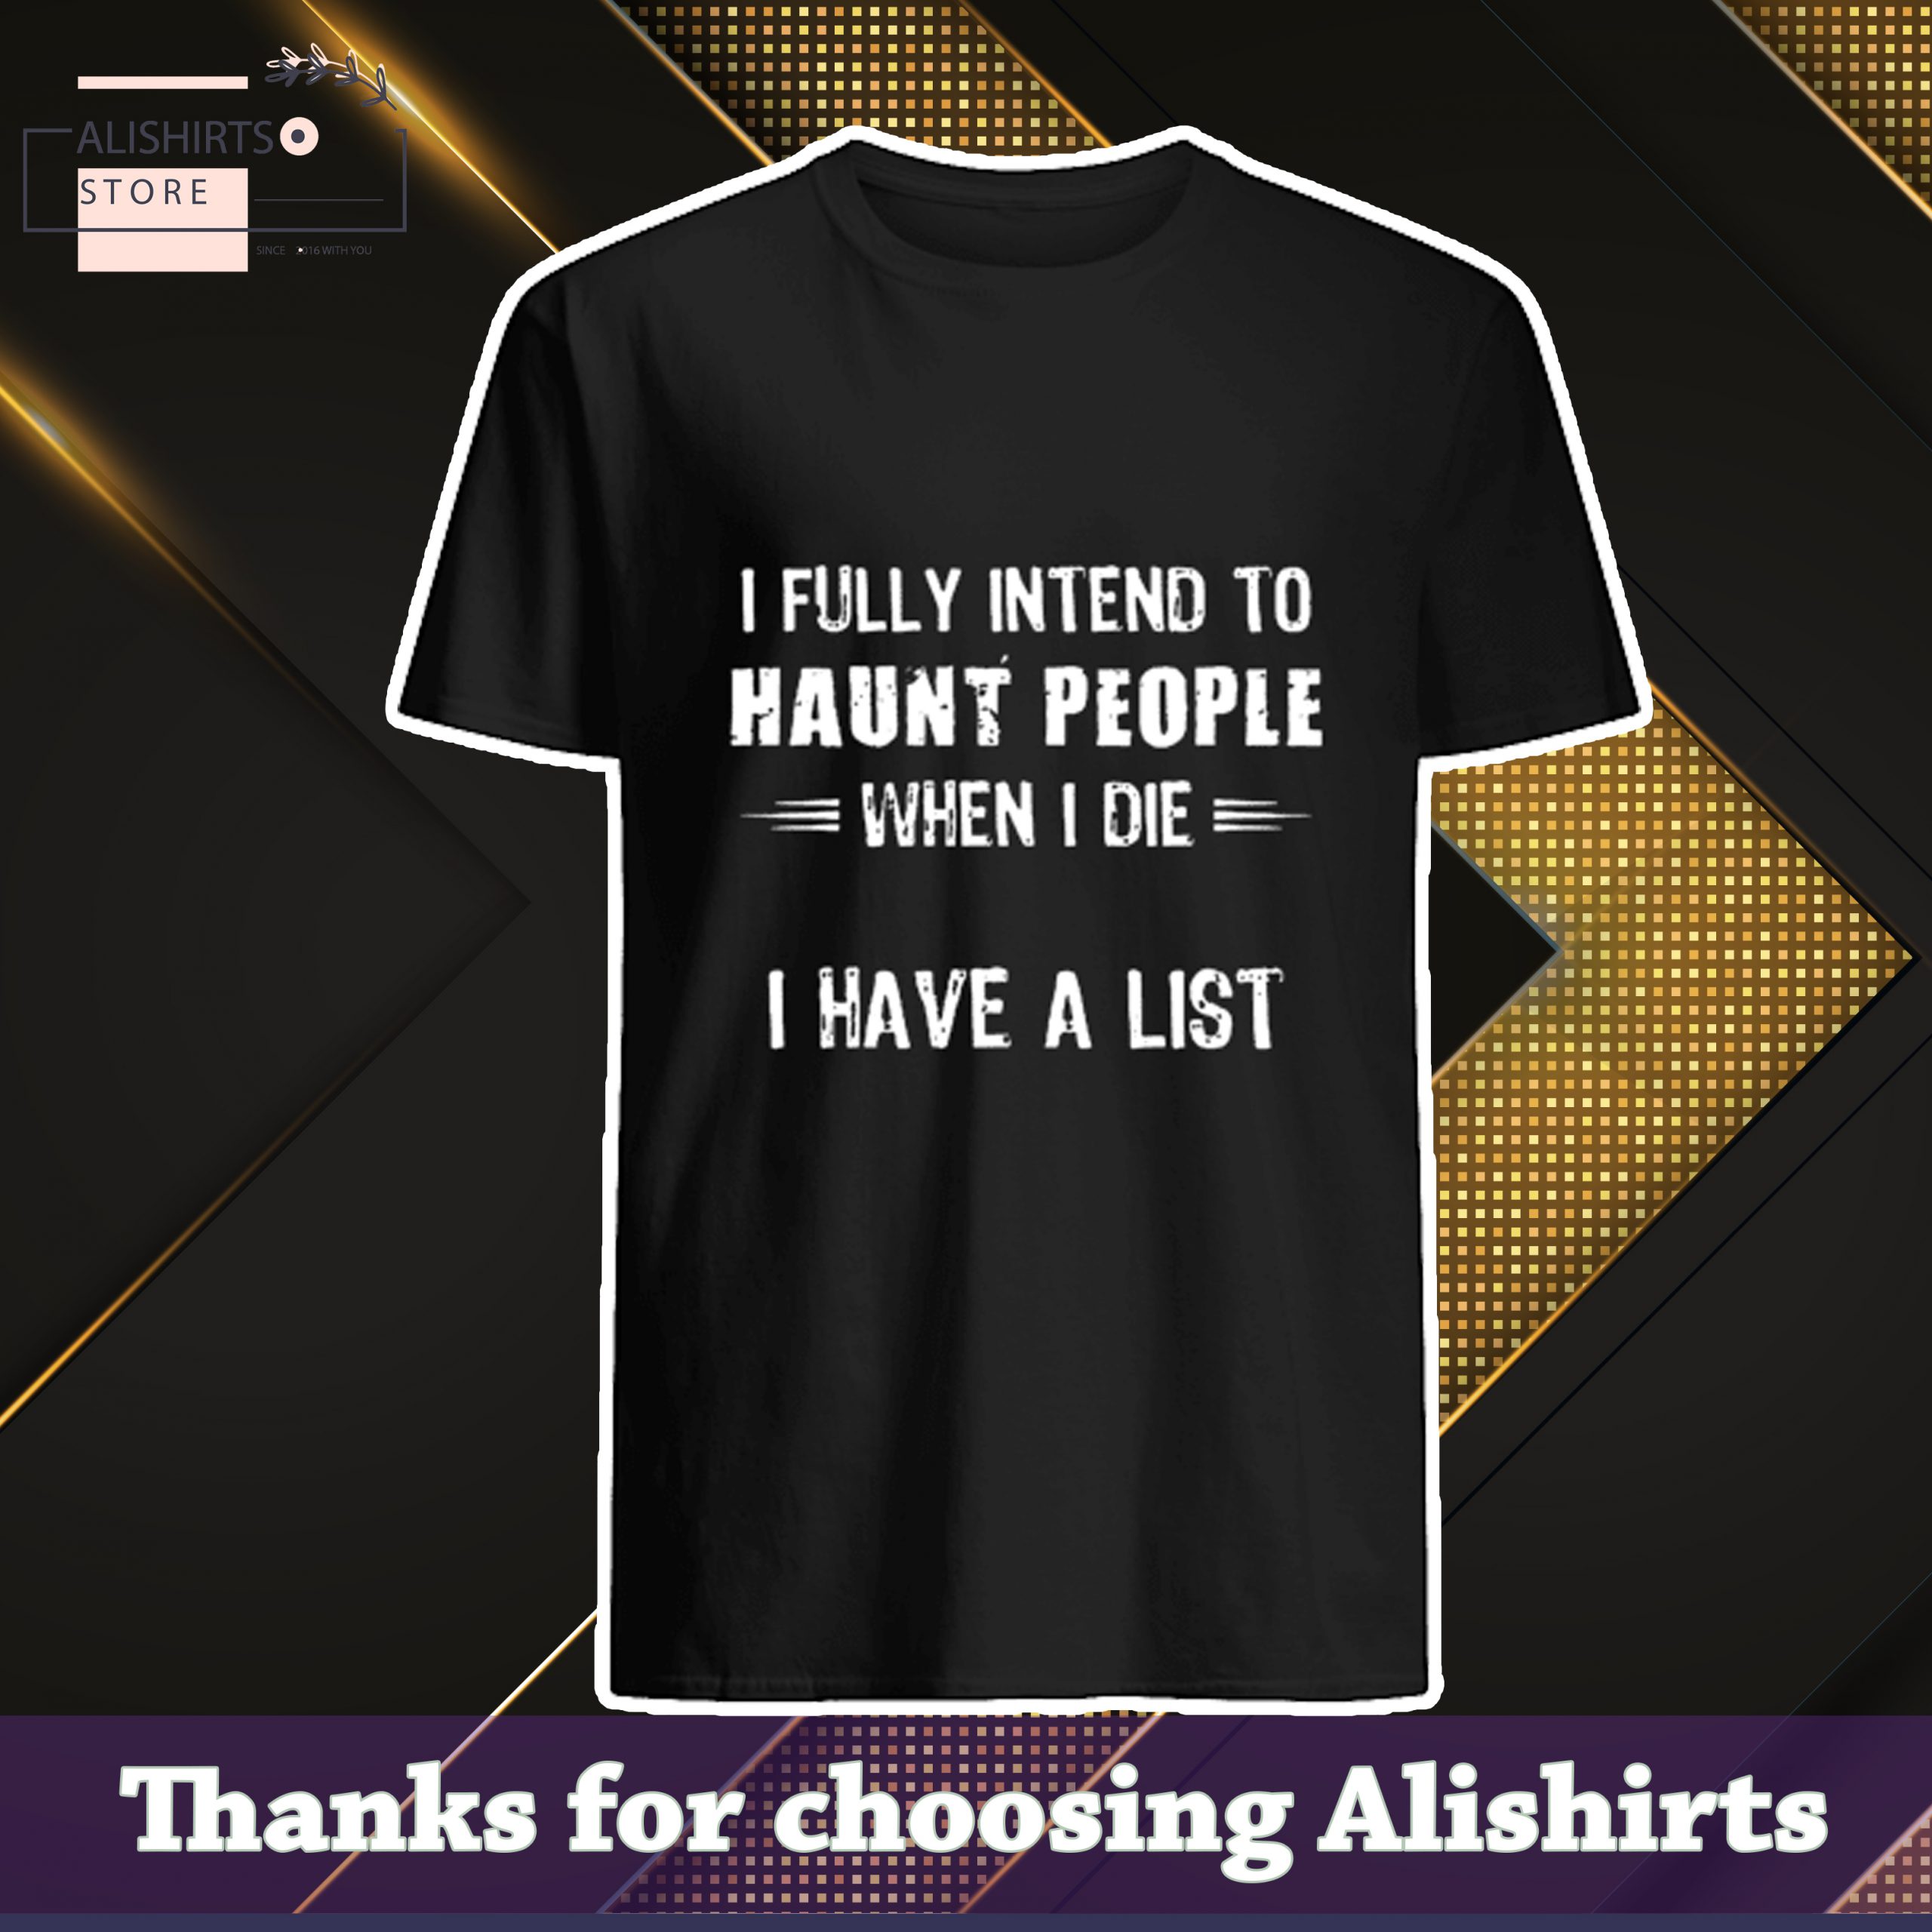 I fully intend to haunt people when i die i have a list shirt